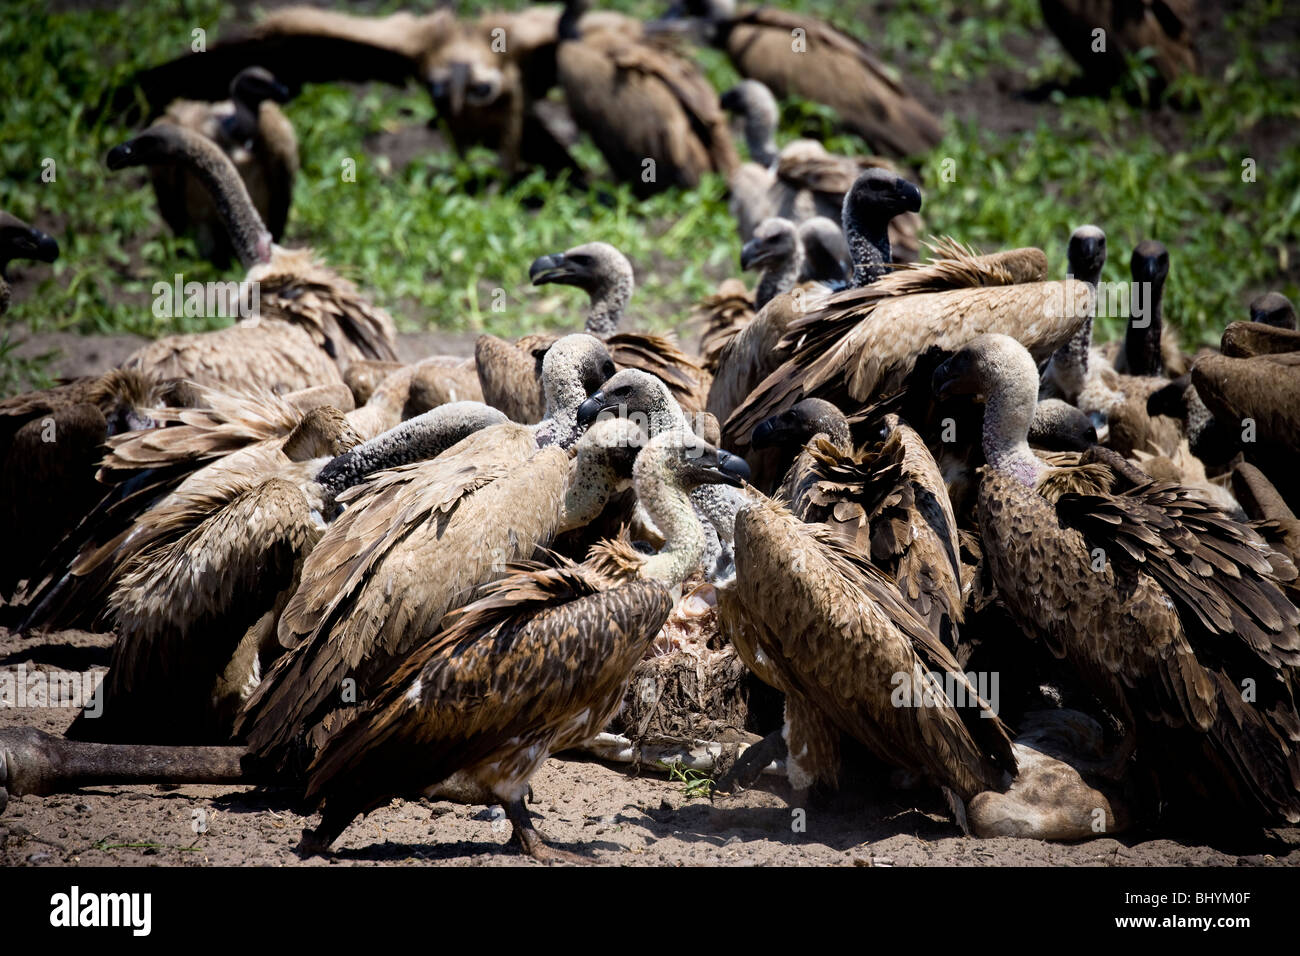 African White-Backed Vultures eating the remains of a Giraffe, Selous Game Reserve, Tanzania, East Africa Stock Photo